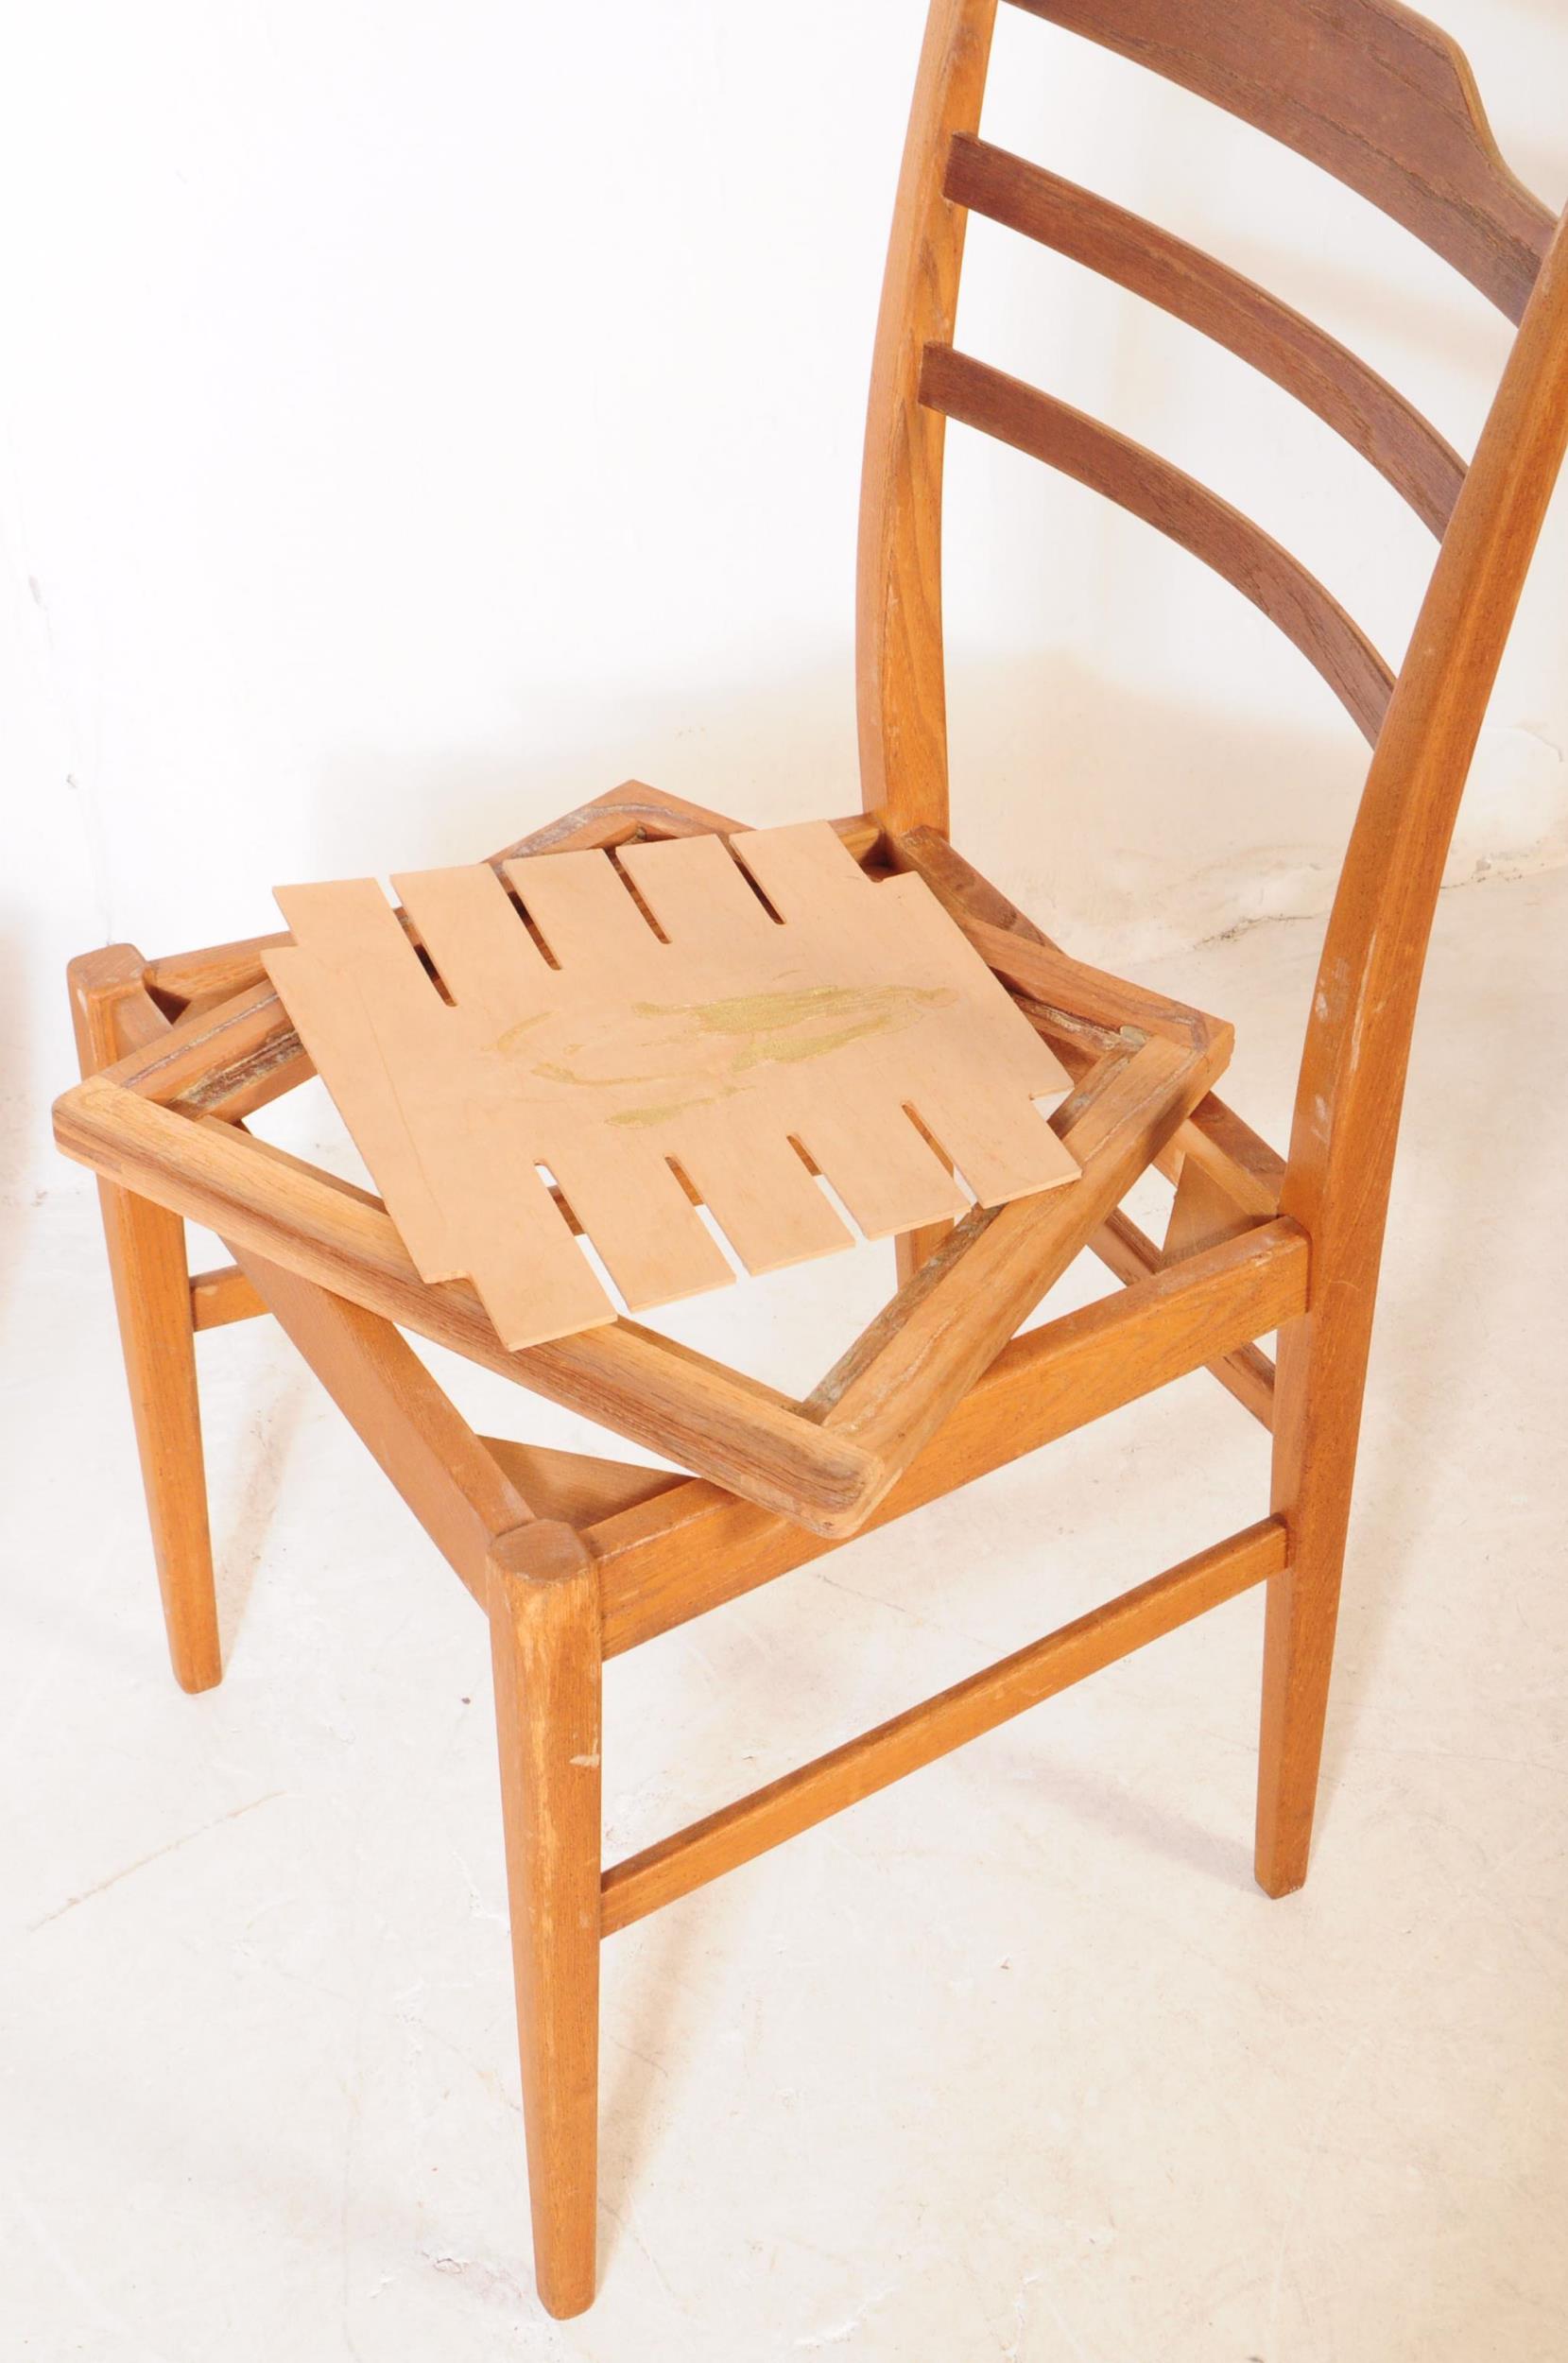 GORDON RUSSELL OF BROADWAY - FOUR RETRO DINING CHAIRS - Image 5 of 5